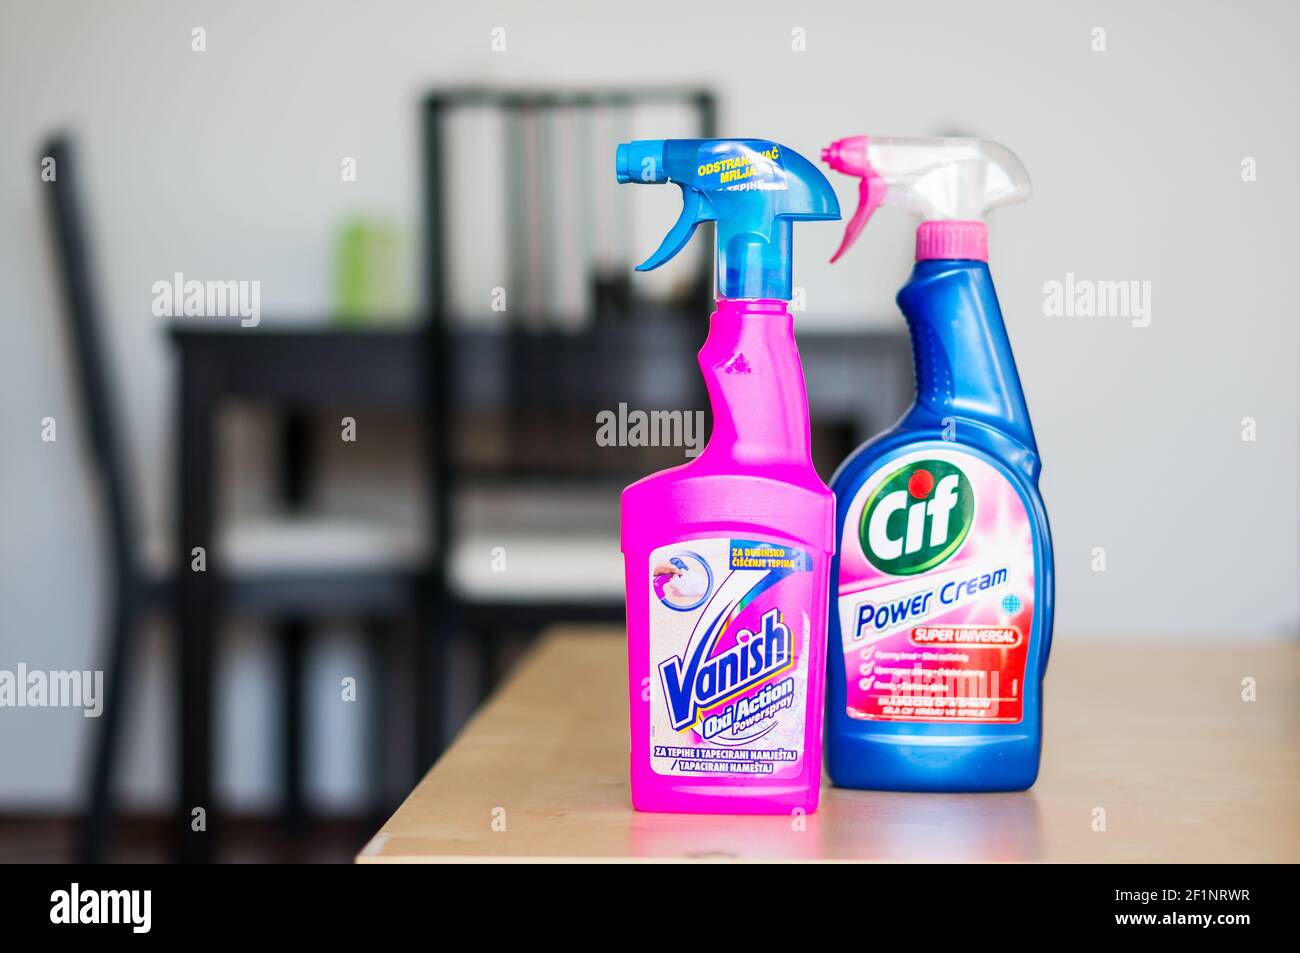 Bottle of Cillit Bang power cleaner degreaser, cleaning product Stock Photo  - Alamy